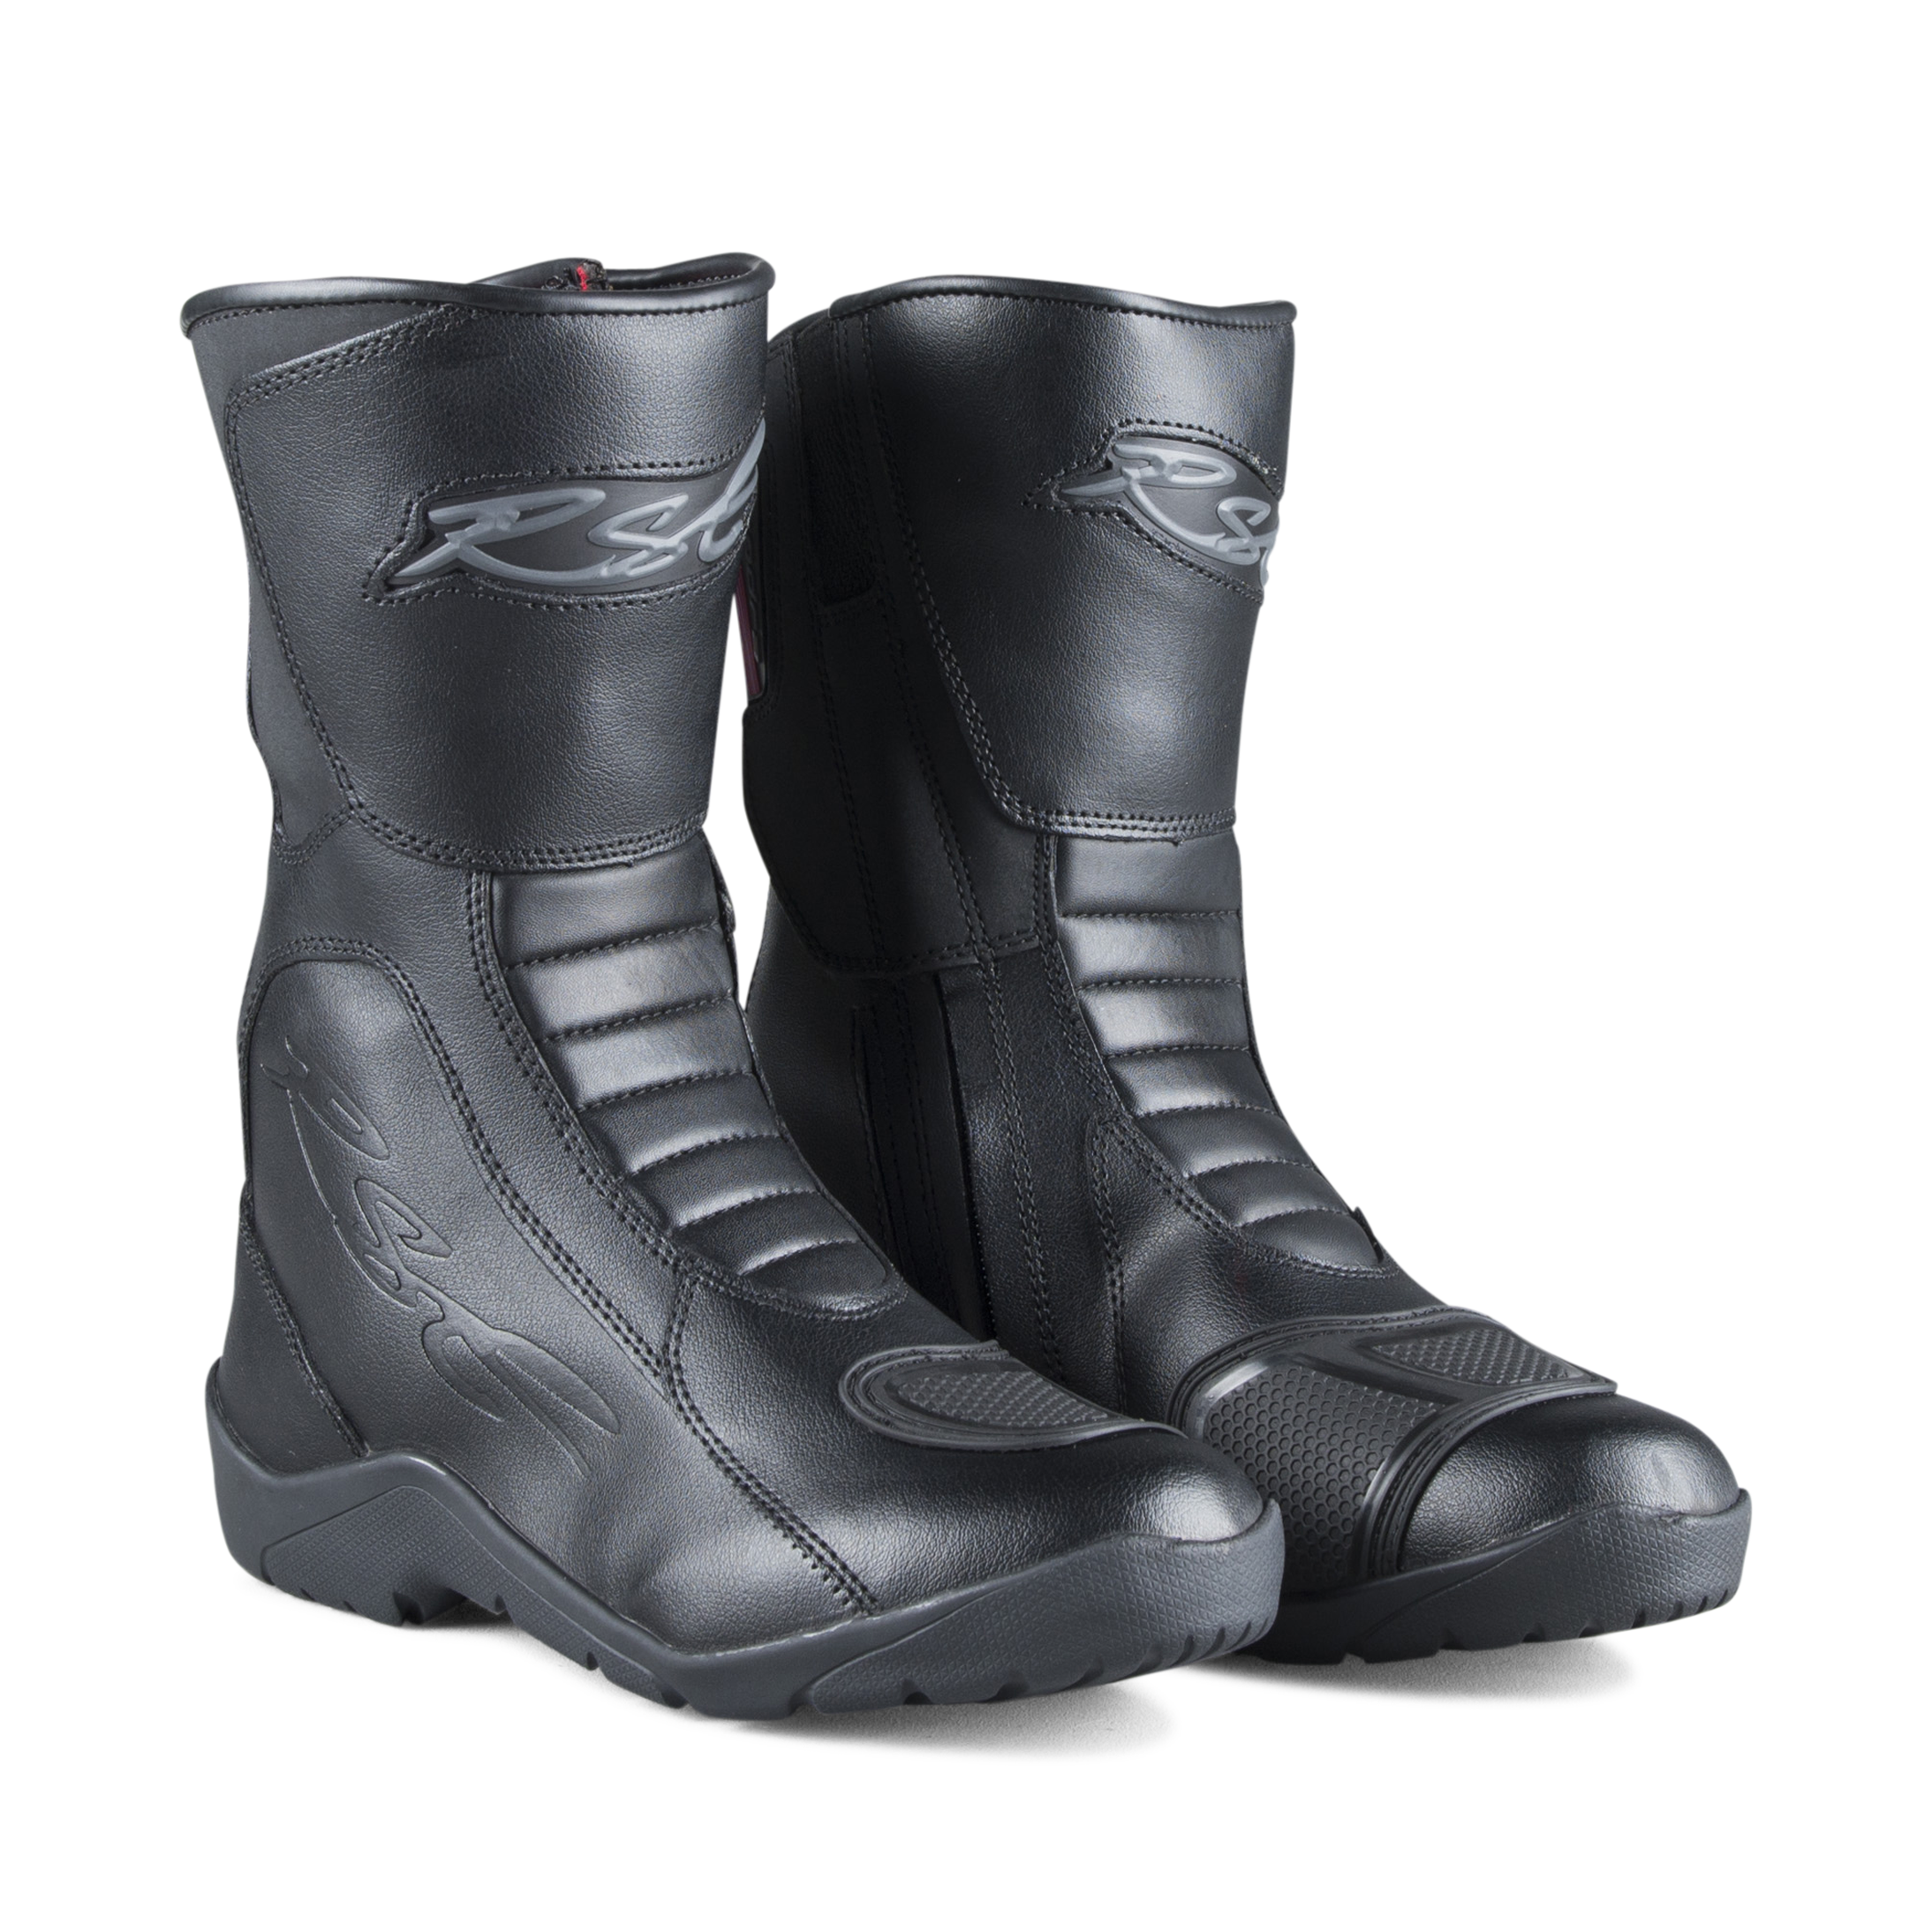 rst ladies motorcycle boots